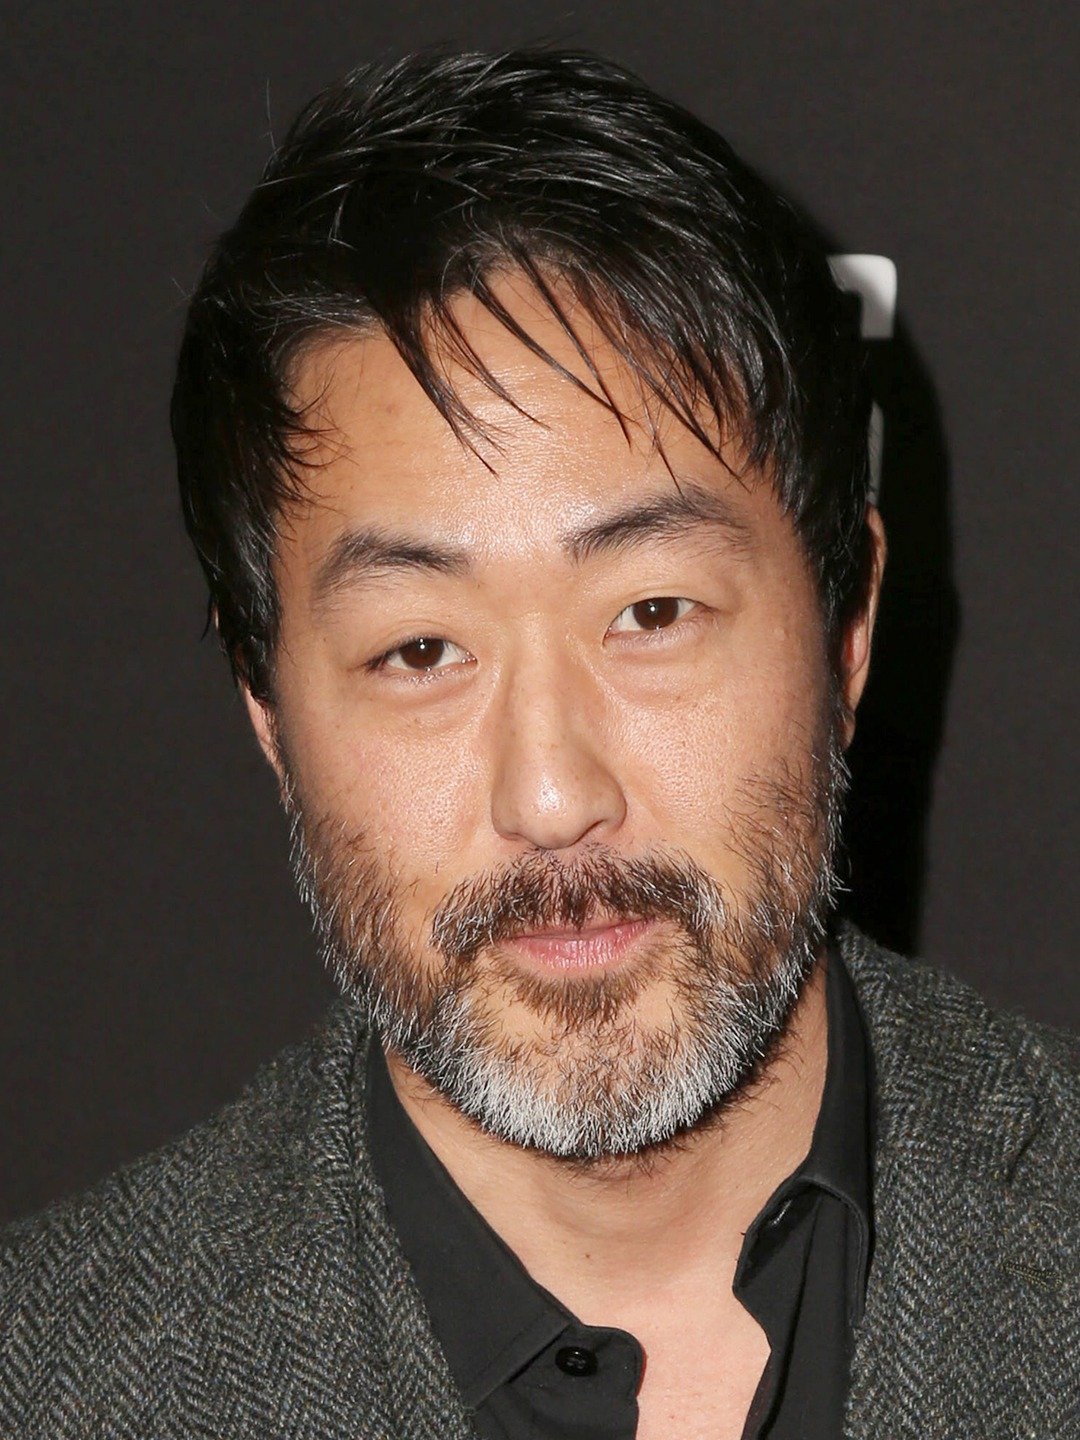 How tall is Kenneth Choi?